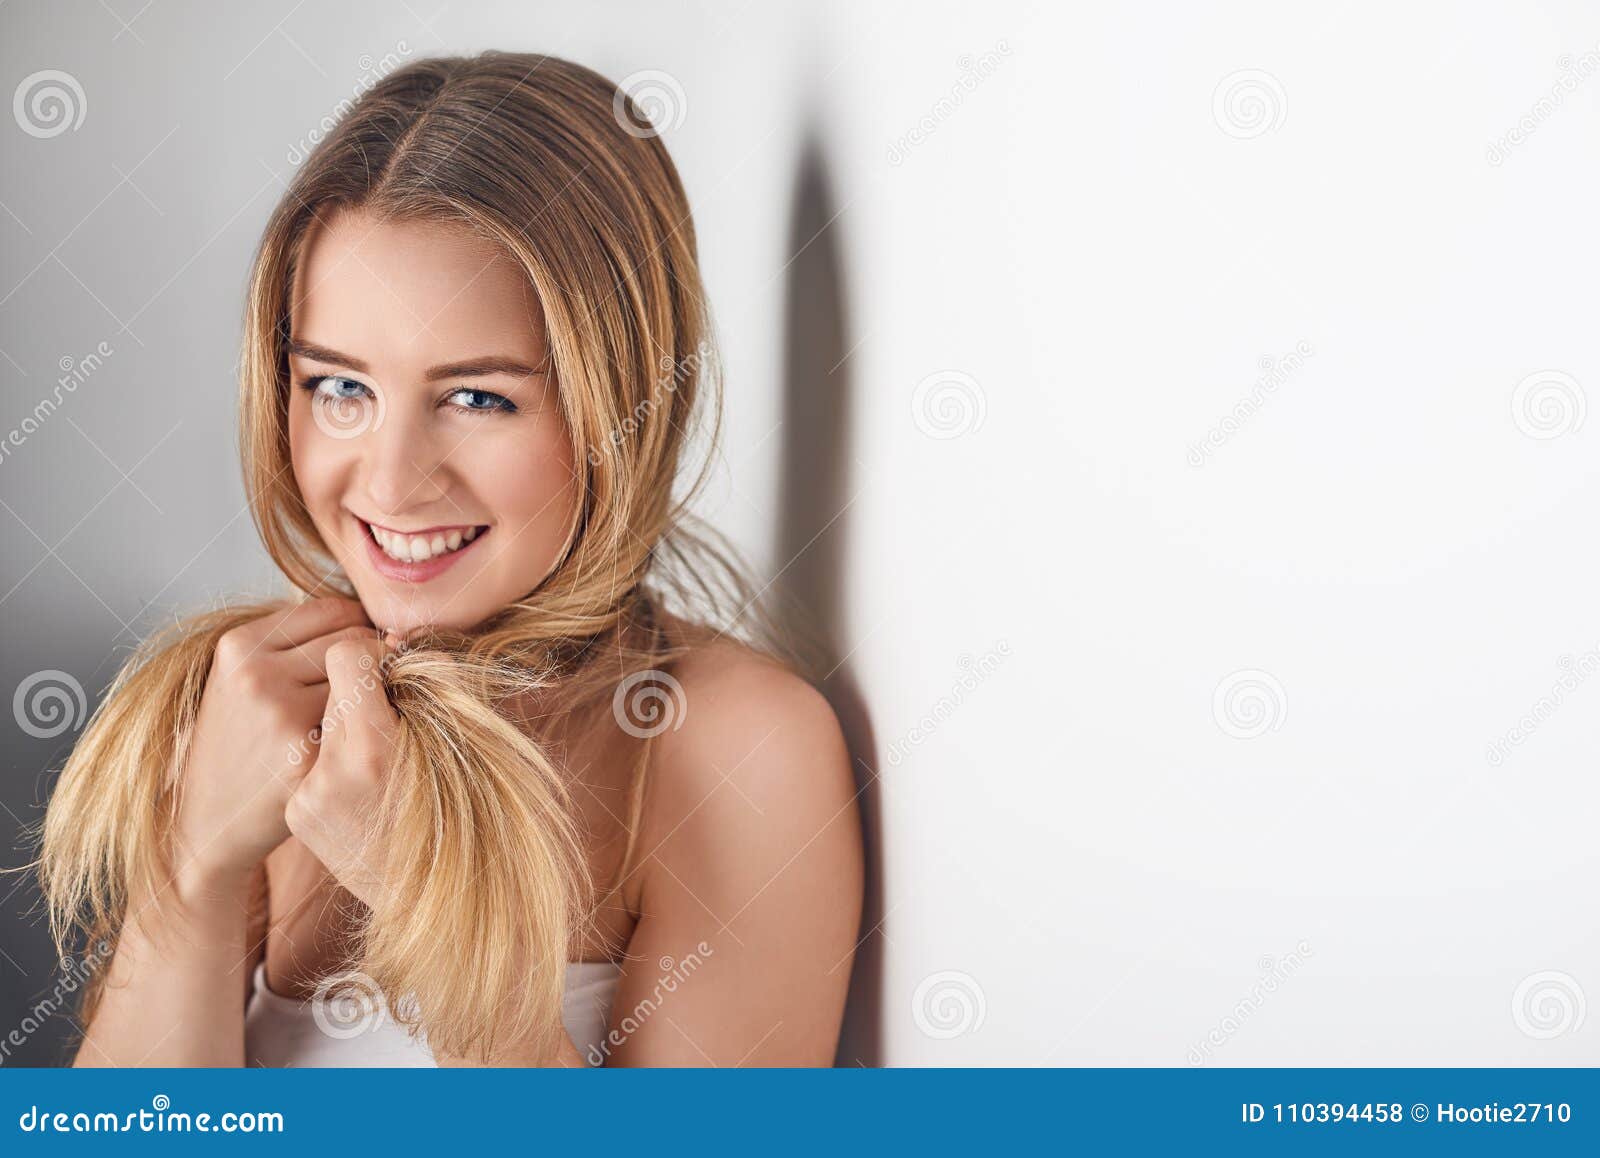 Young Smiling Shy Blond Woman Stock Photo Imag